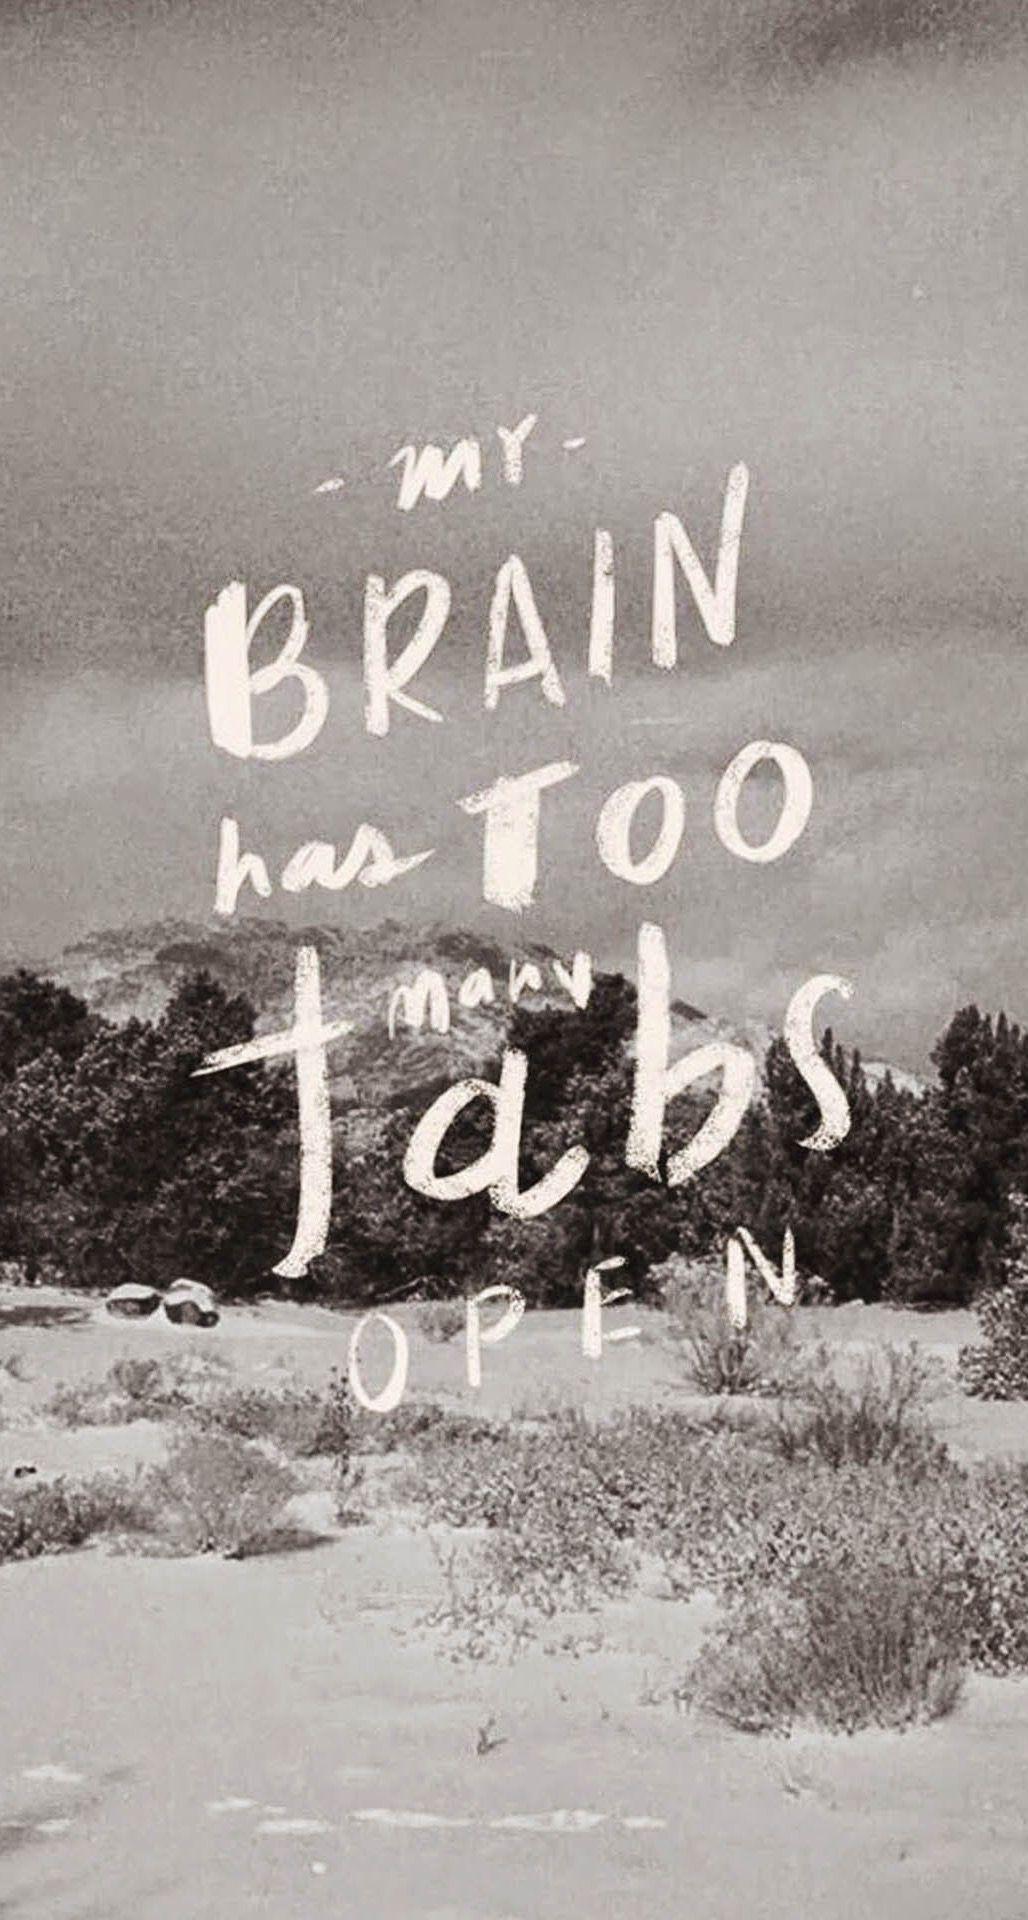 My Brain Has Too Many Tabs Open iPhone 6 Plus HD Wallpaper